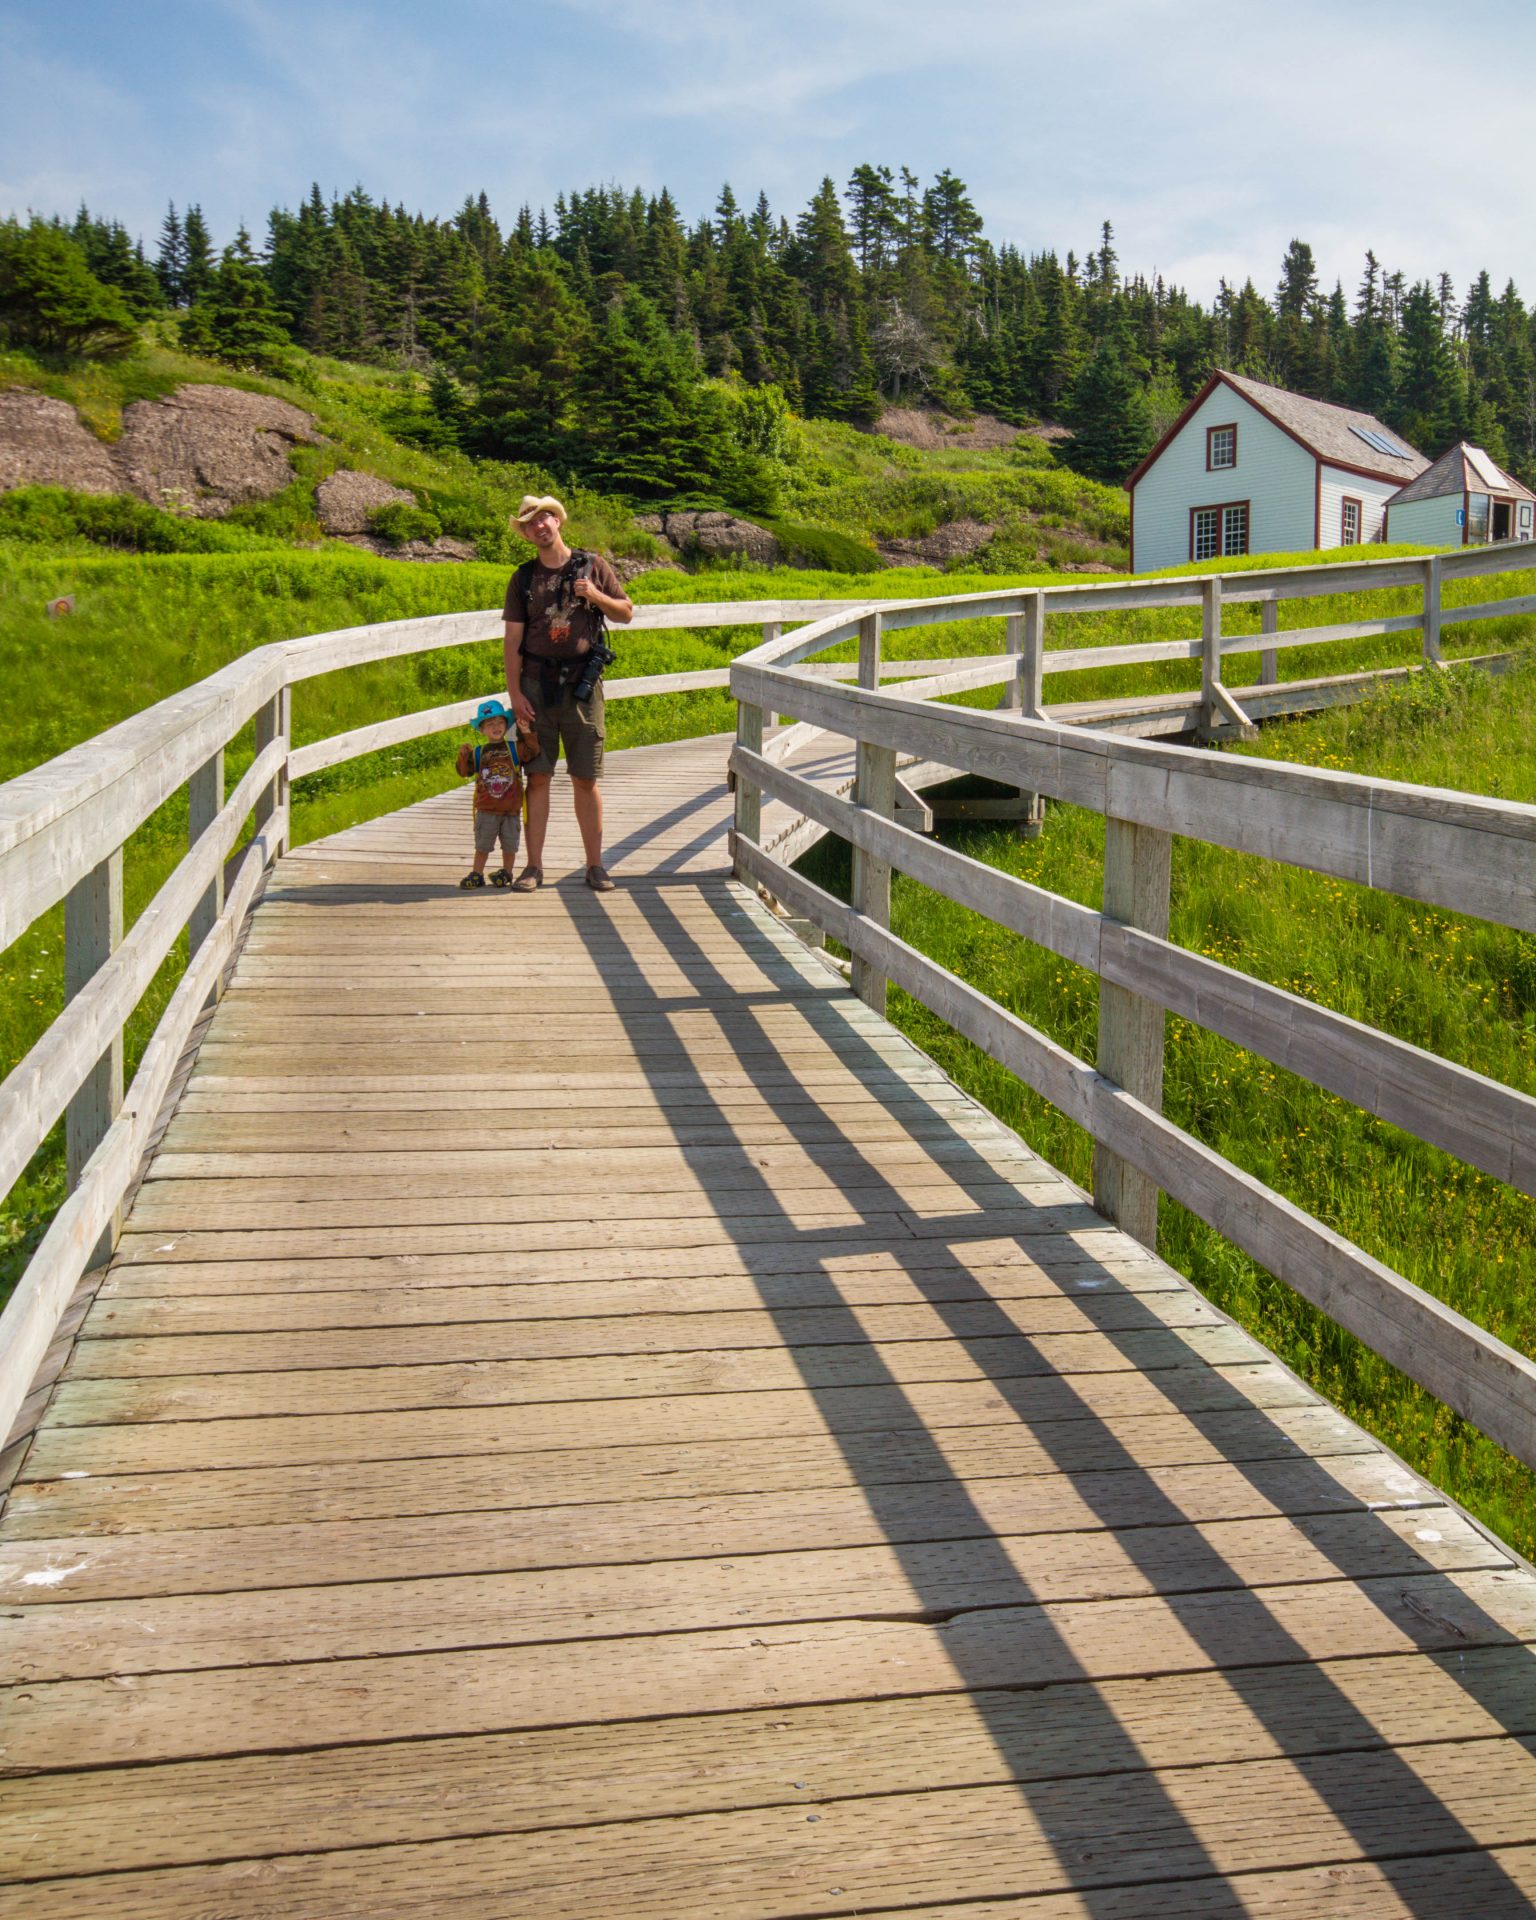 Mom and child walk on the boardwalk on Bonaventure Island in the National Park of Bonaventure Island and Perce Rock